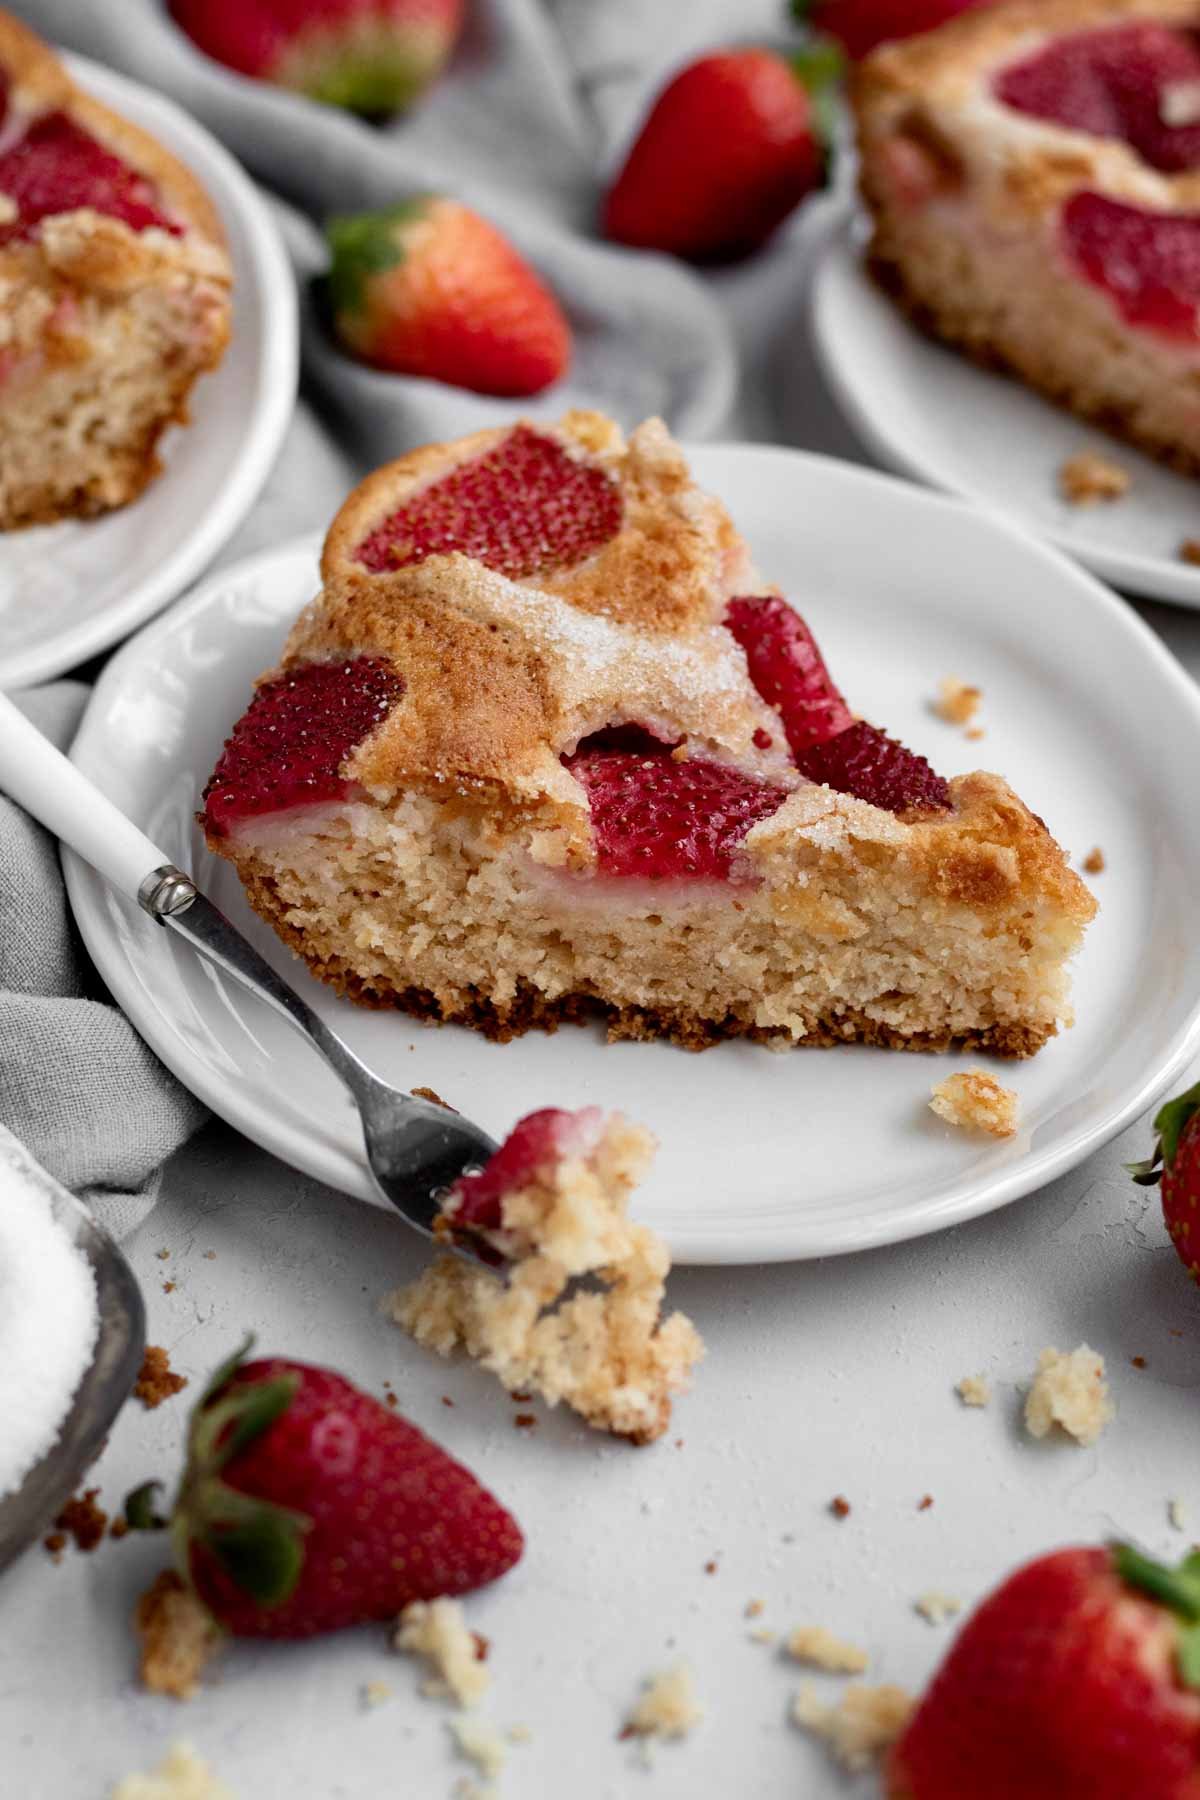 A slice of delicious Eggless Strawberry Cake on a plate.